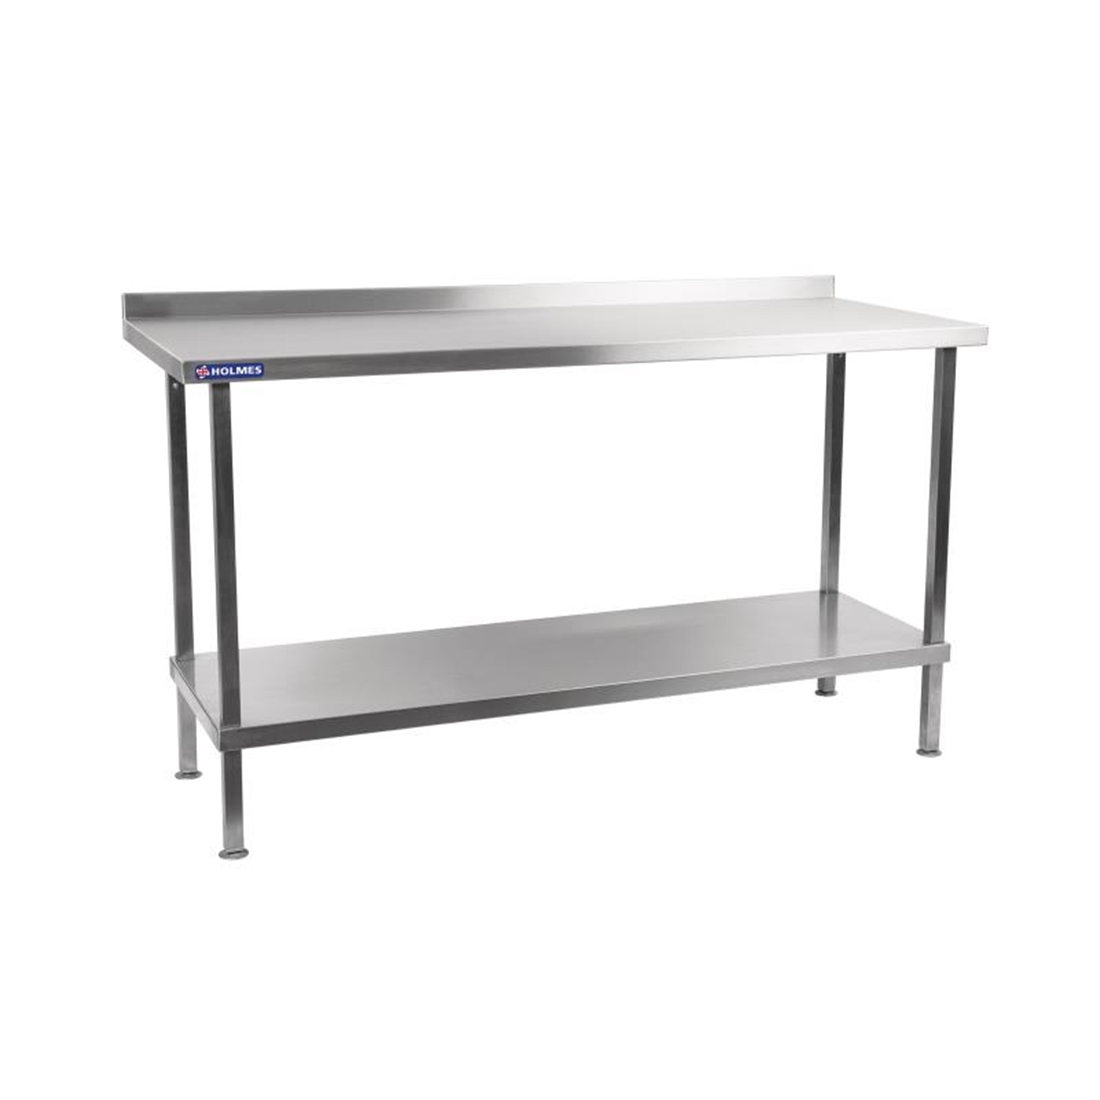 Holmes Self Assembly Stainless Steel Wall Table 1800mm